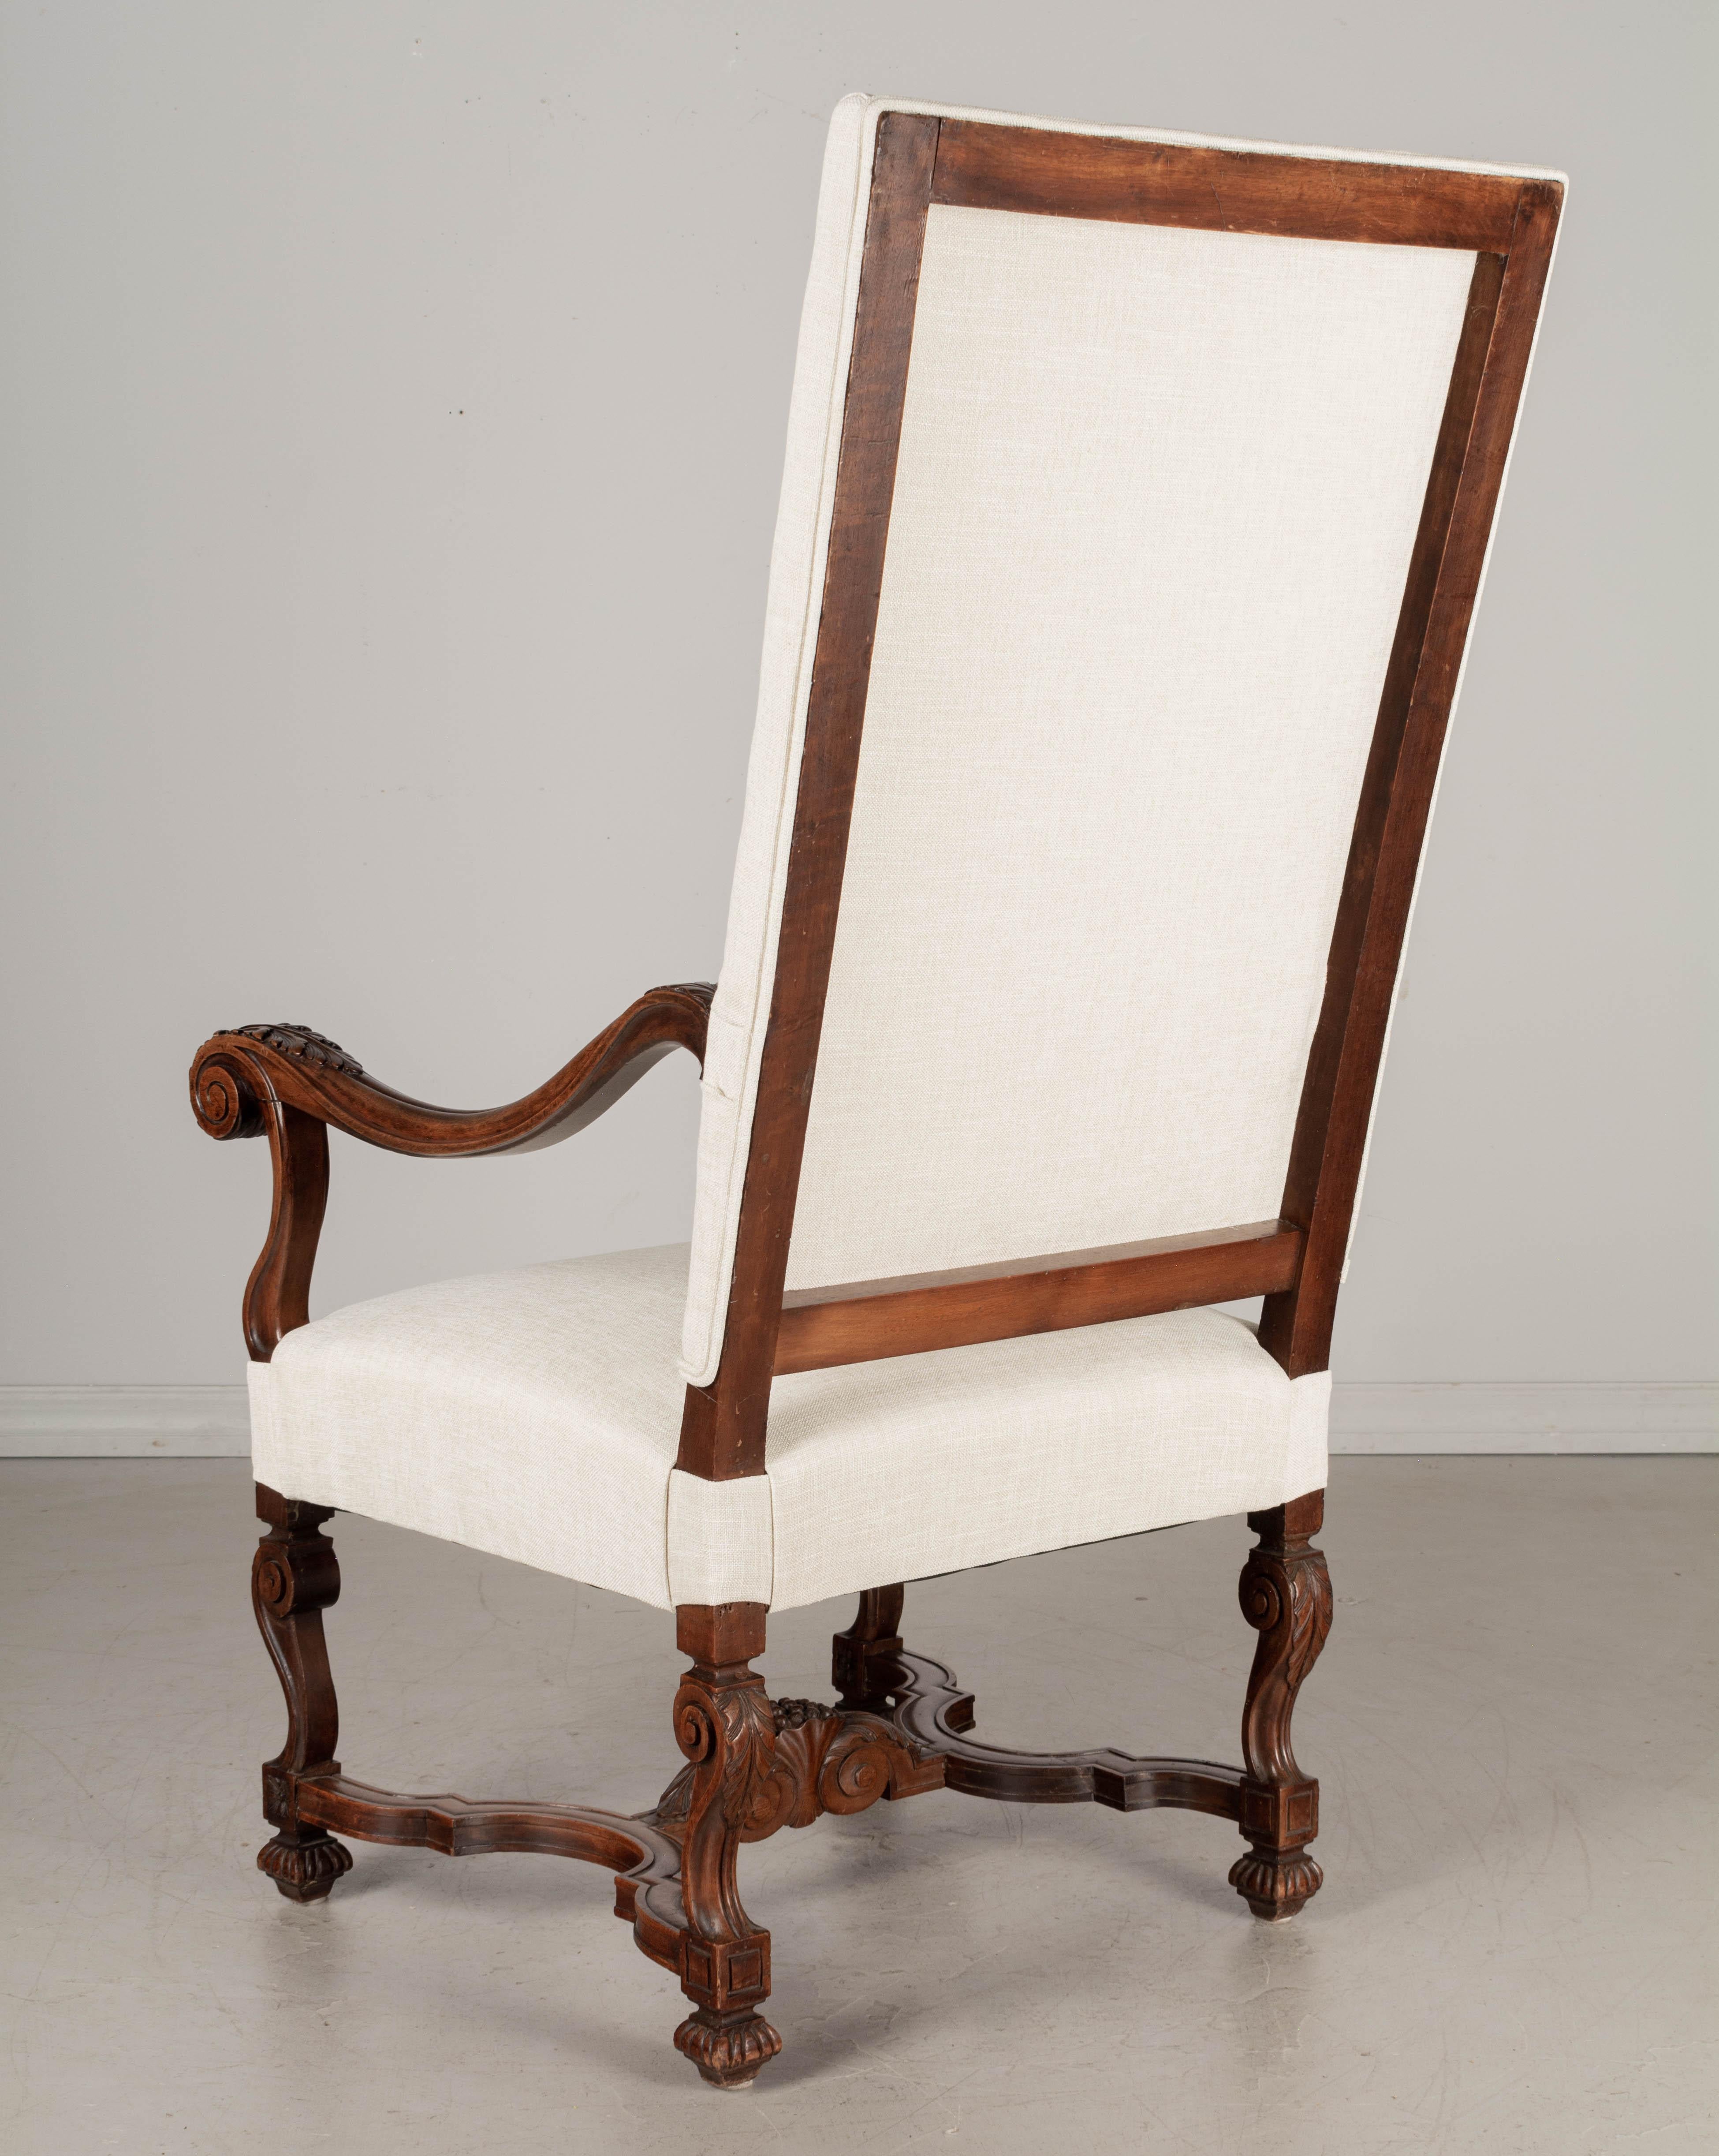 Hand-Carved 19th Century Louis XIII Style Fauteuil or Arm Chair